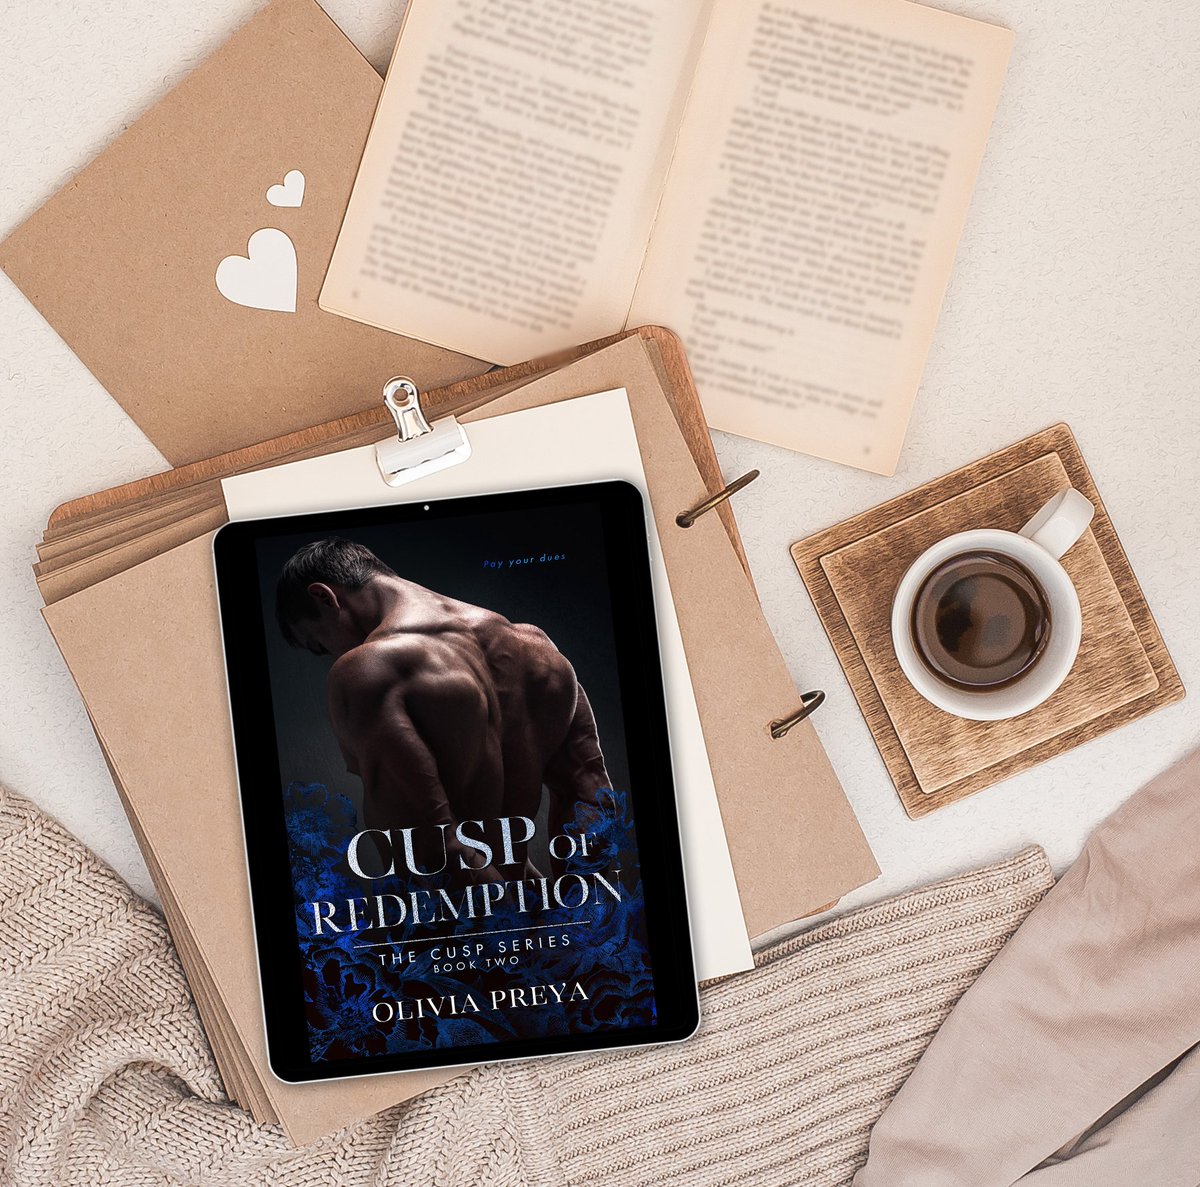 Today at my blog, I’m reviewing Cusp of Redemption, book two in The Cusp Series, a contemporary mafia romance by Olivia Preya. #mafiaromance #darkromancenovel #antiheroromance #contemporaryromance wp.me/p12iNR-afW